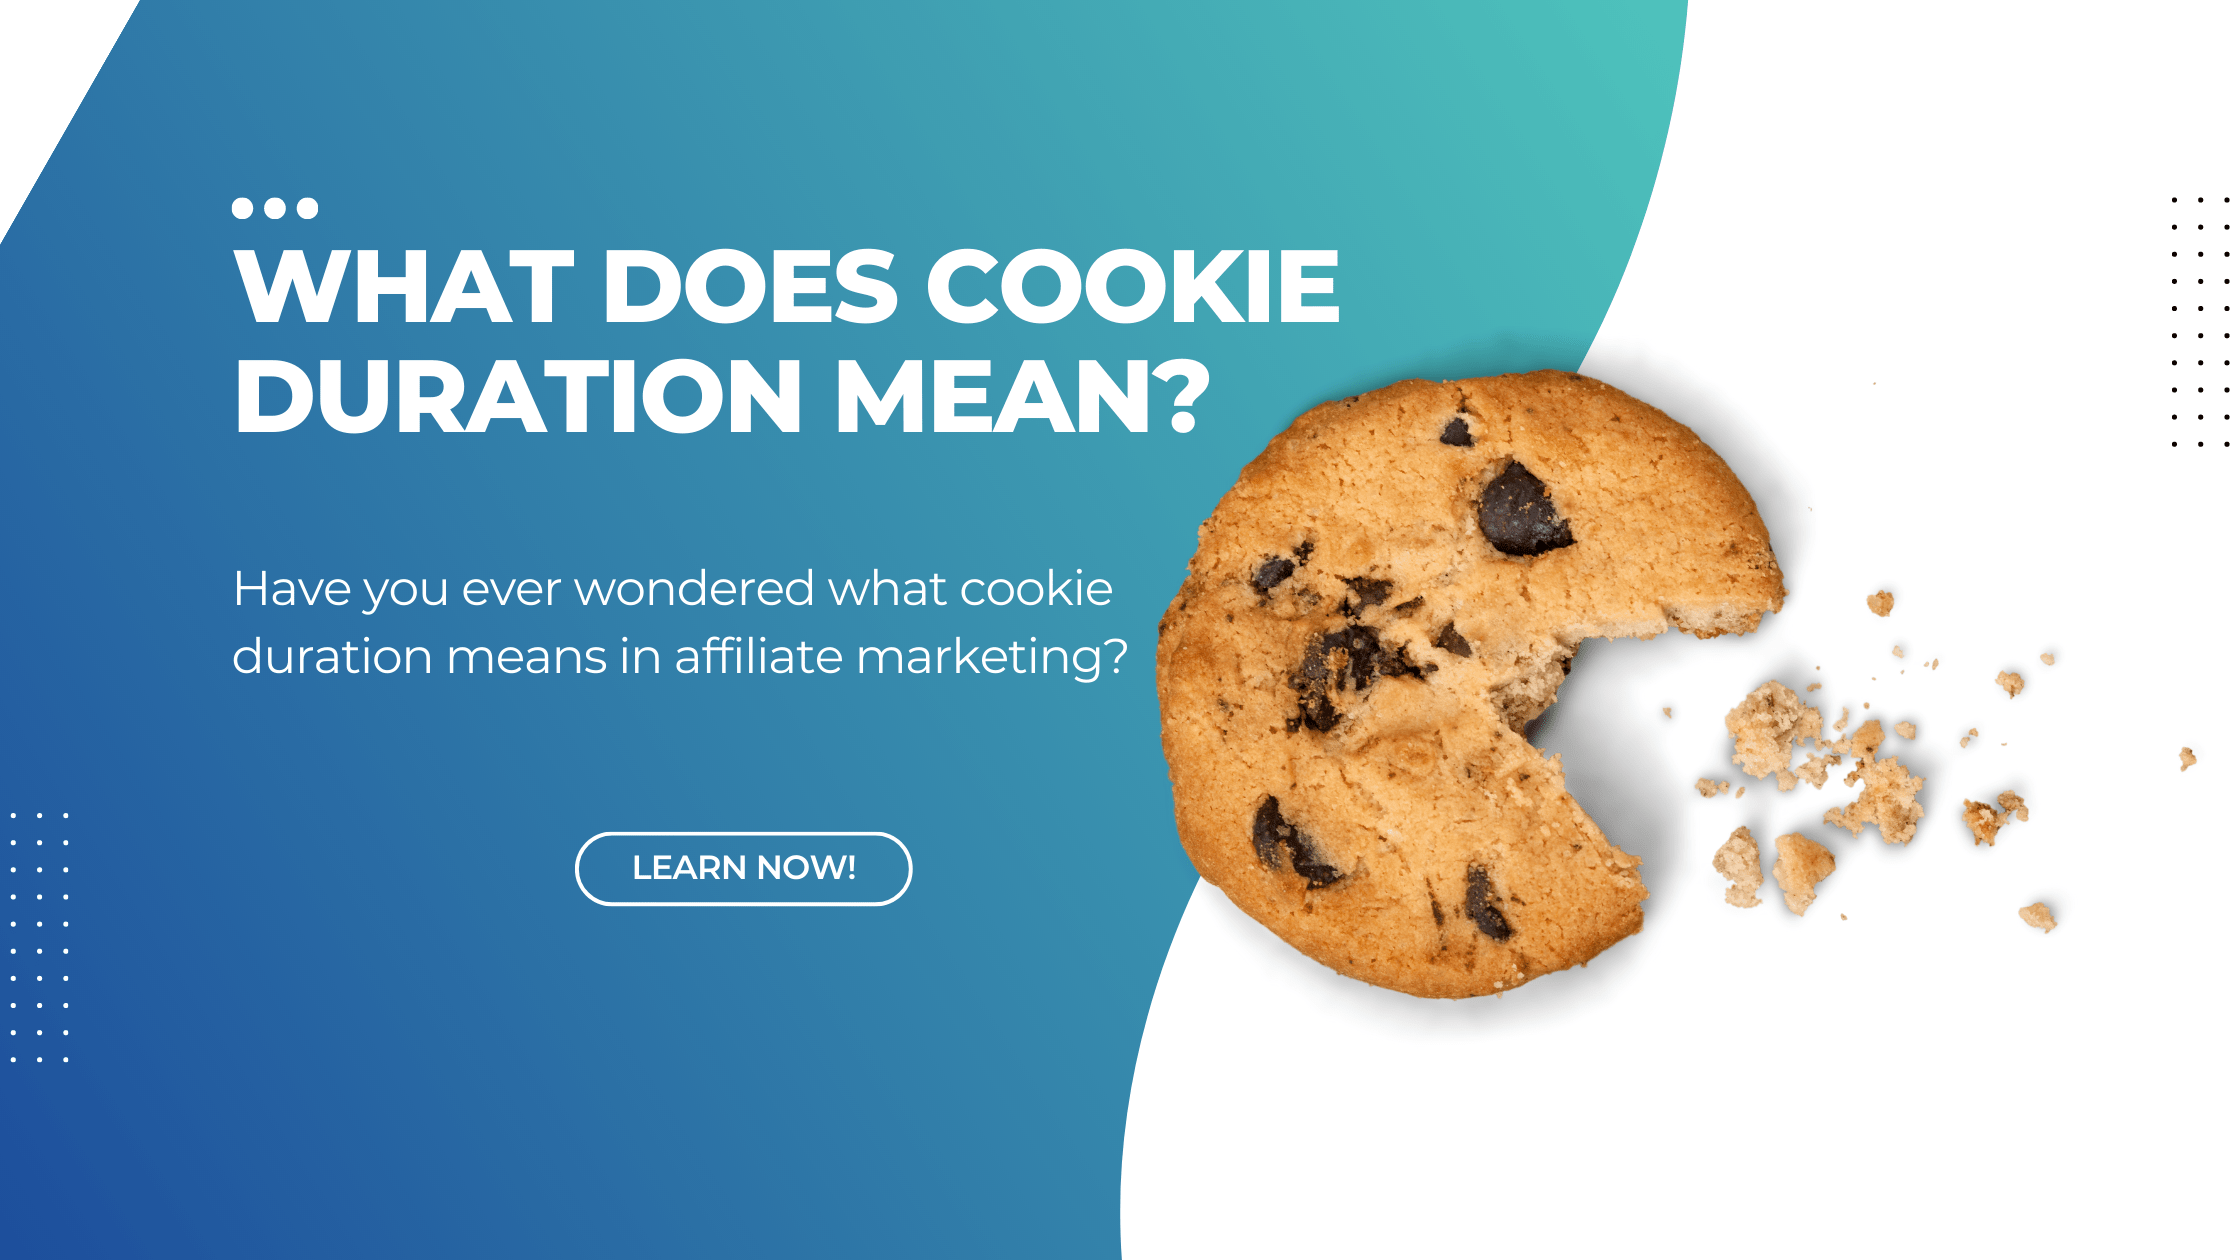 What does cookie duration mean in affiliate marketing